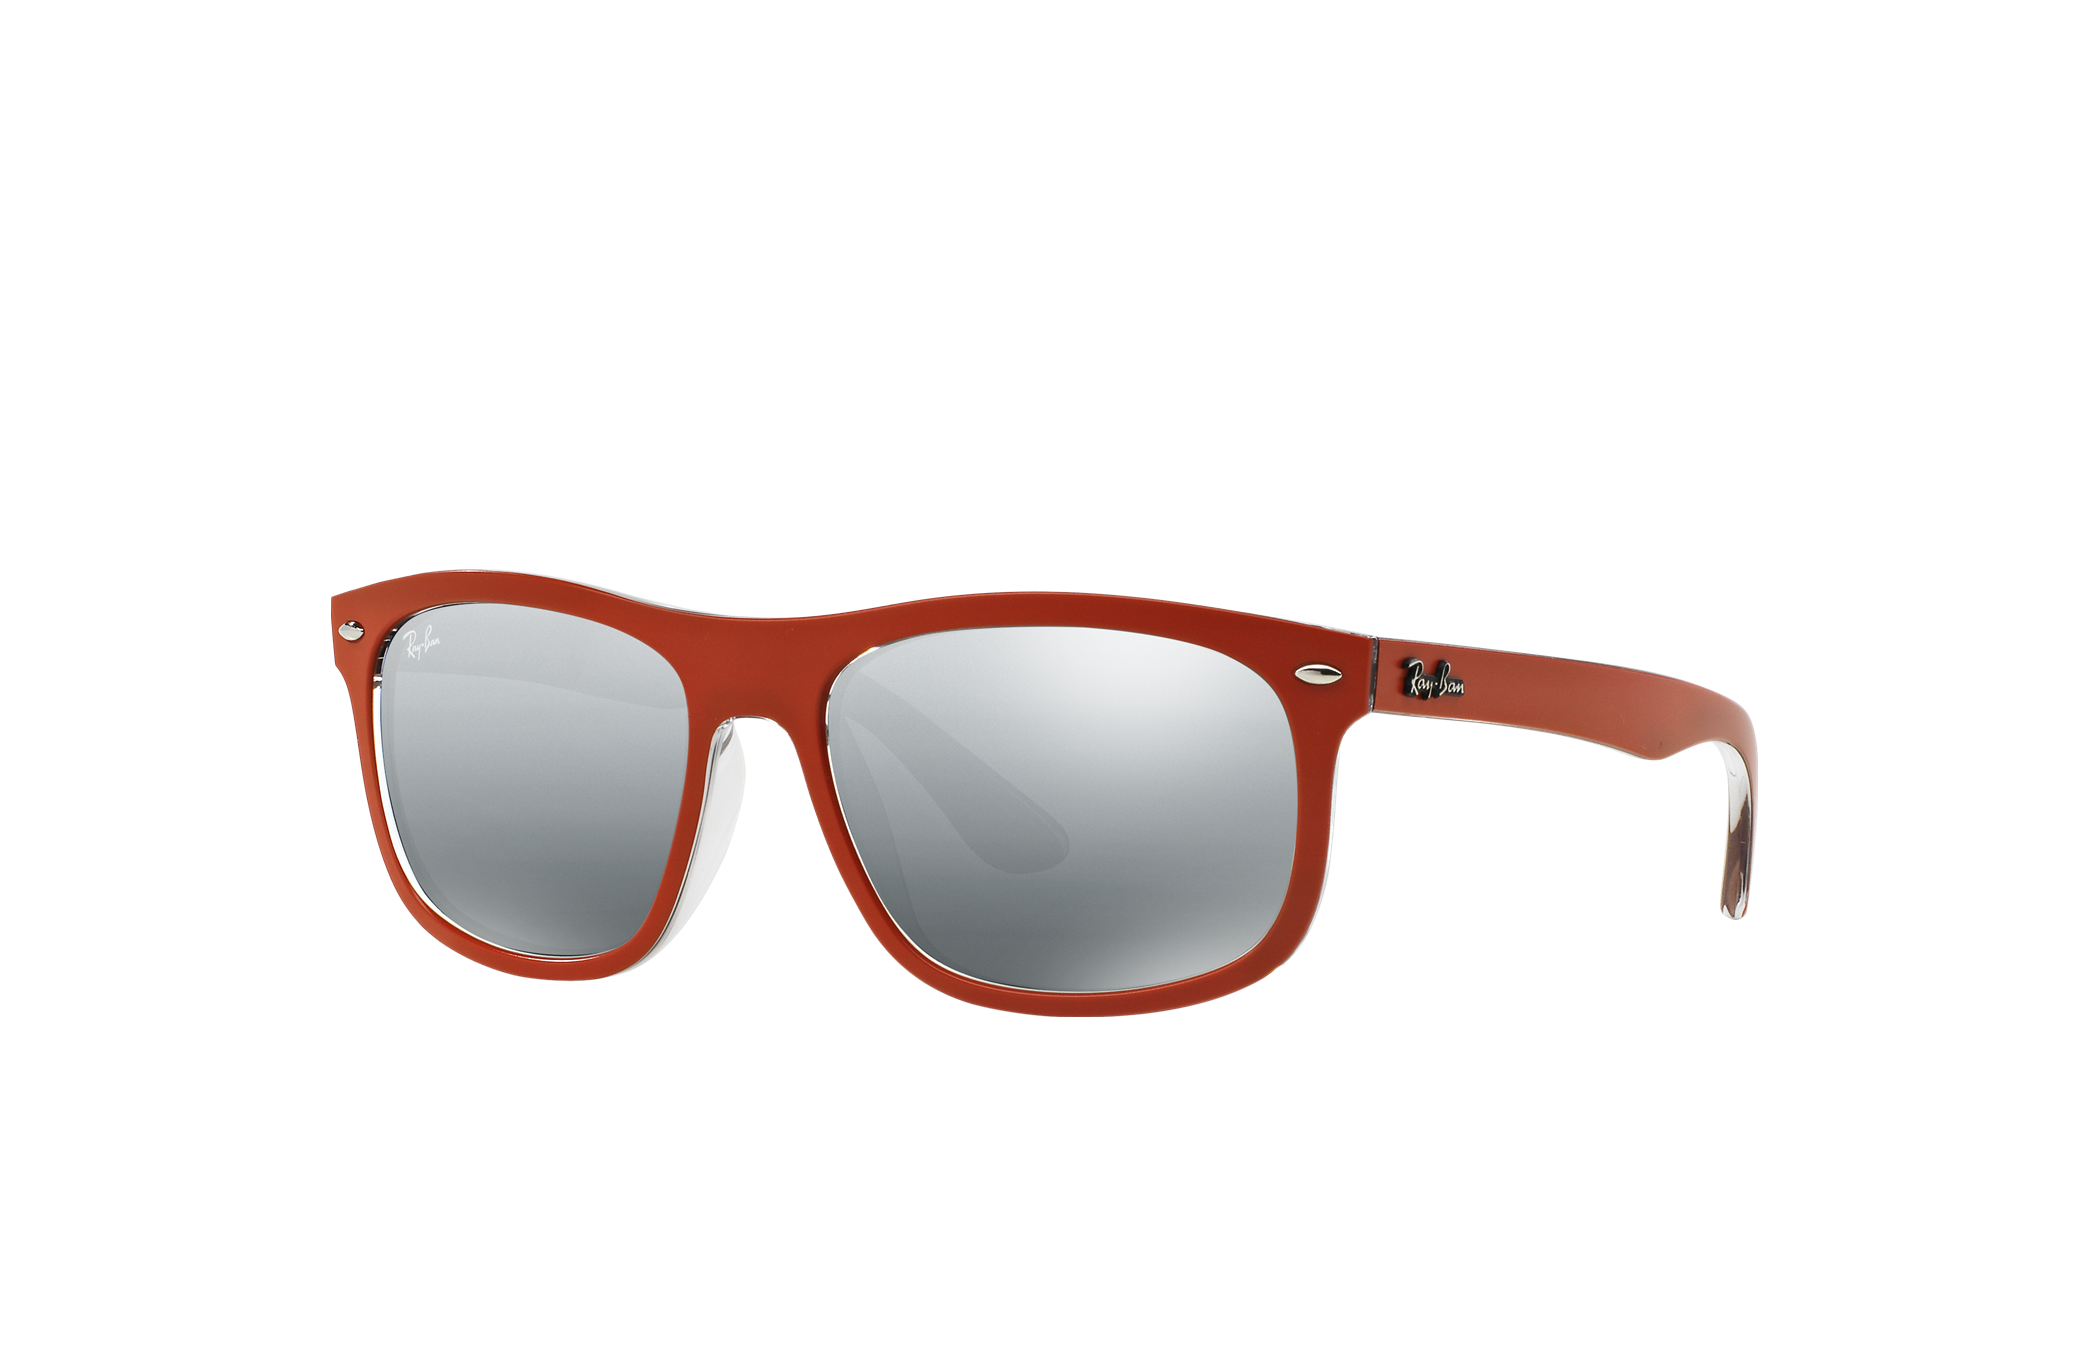 Rb4226 Sunglasses in Orange and Grey | Ray-Ban®